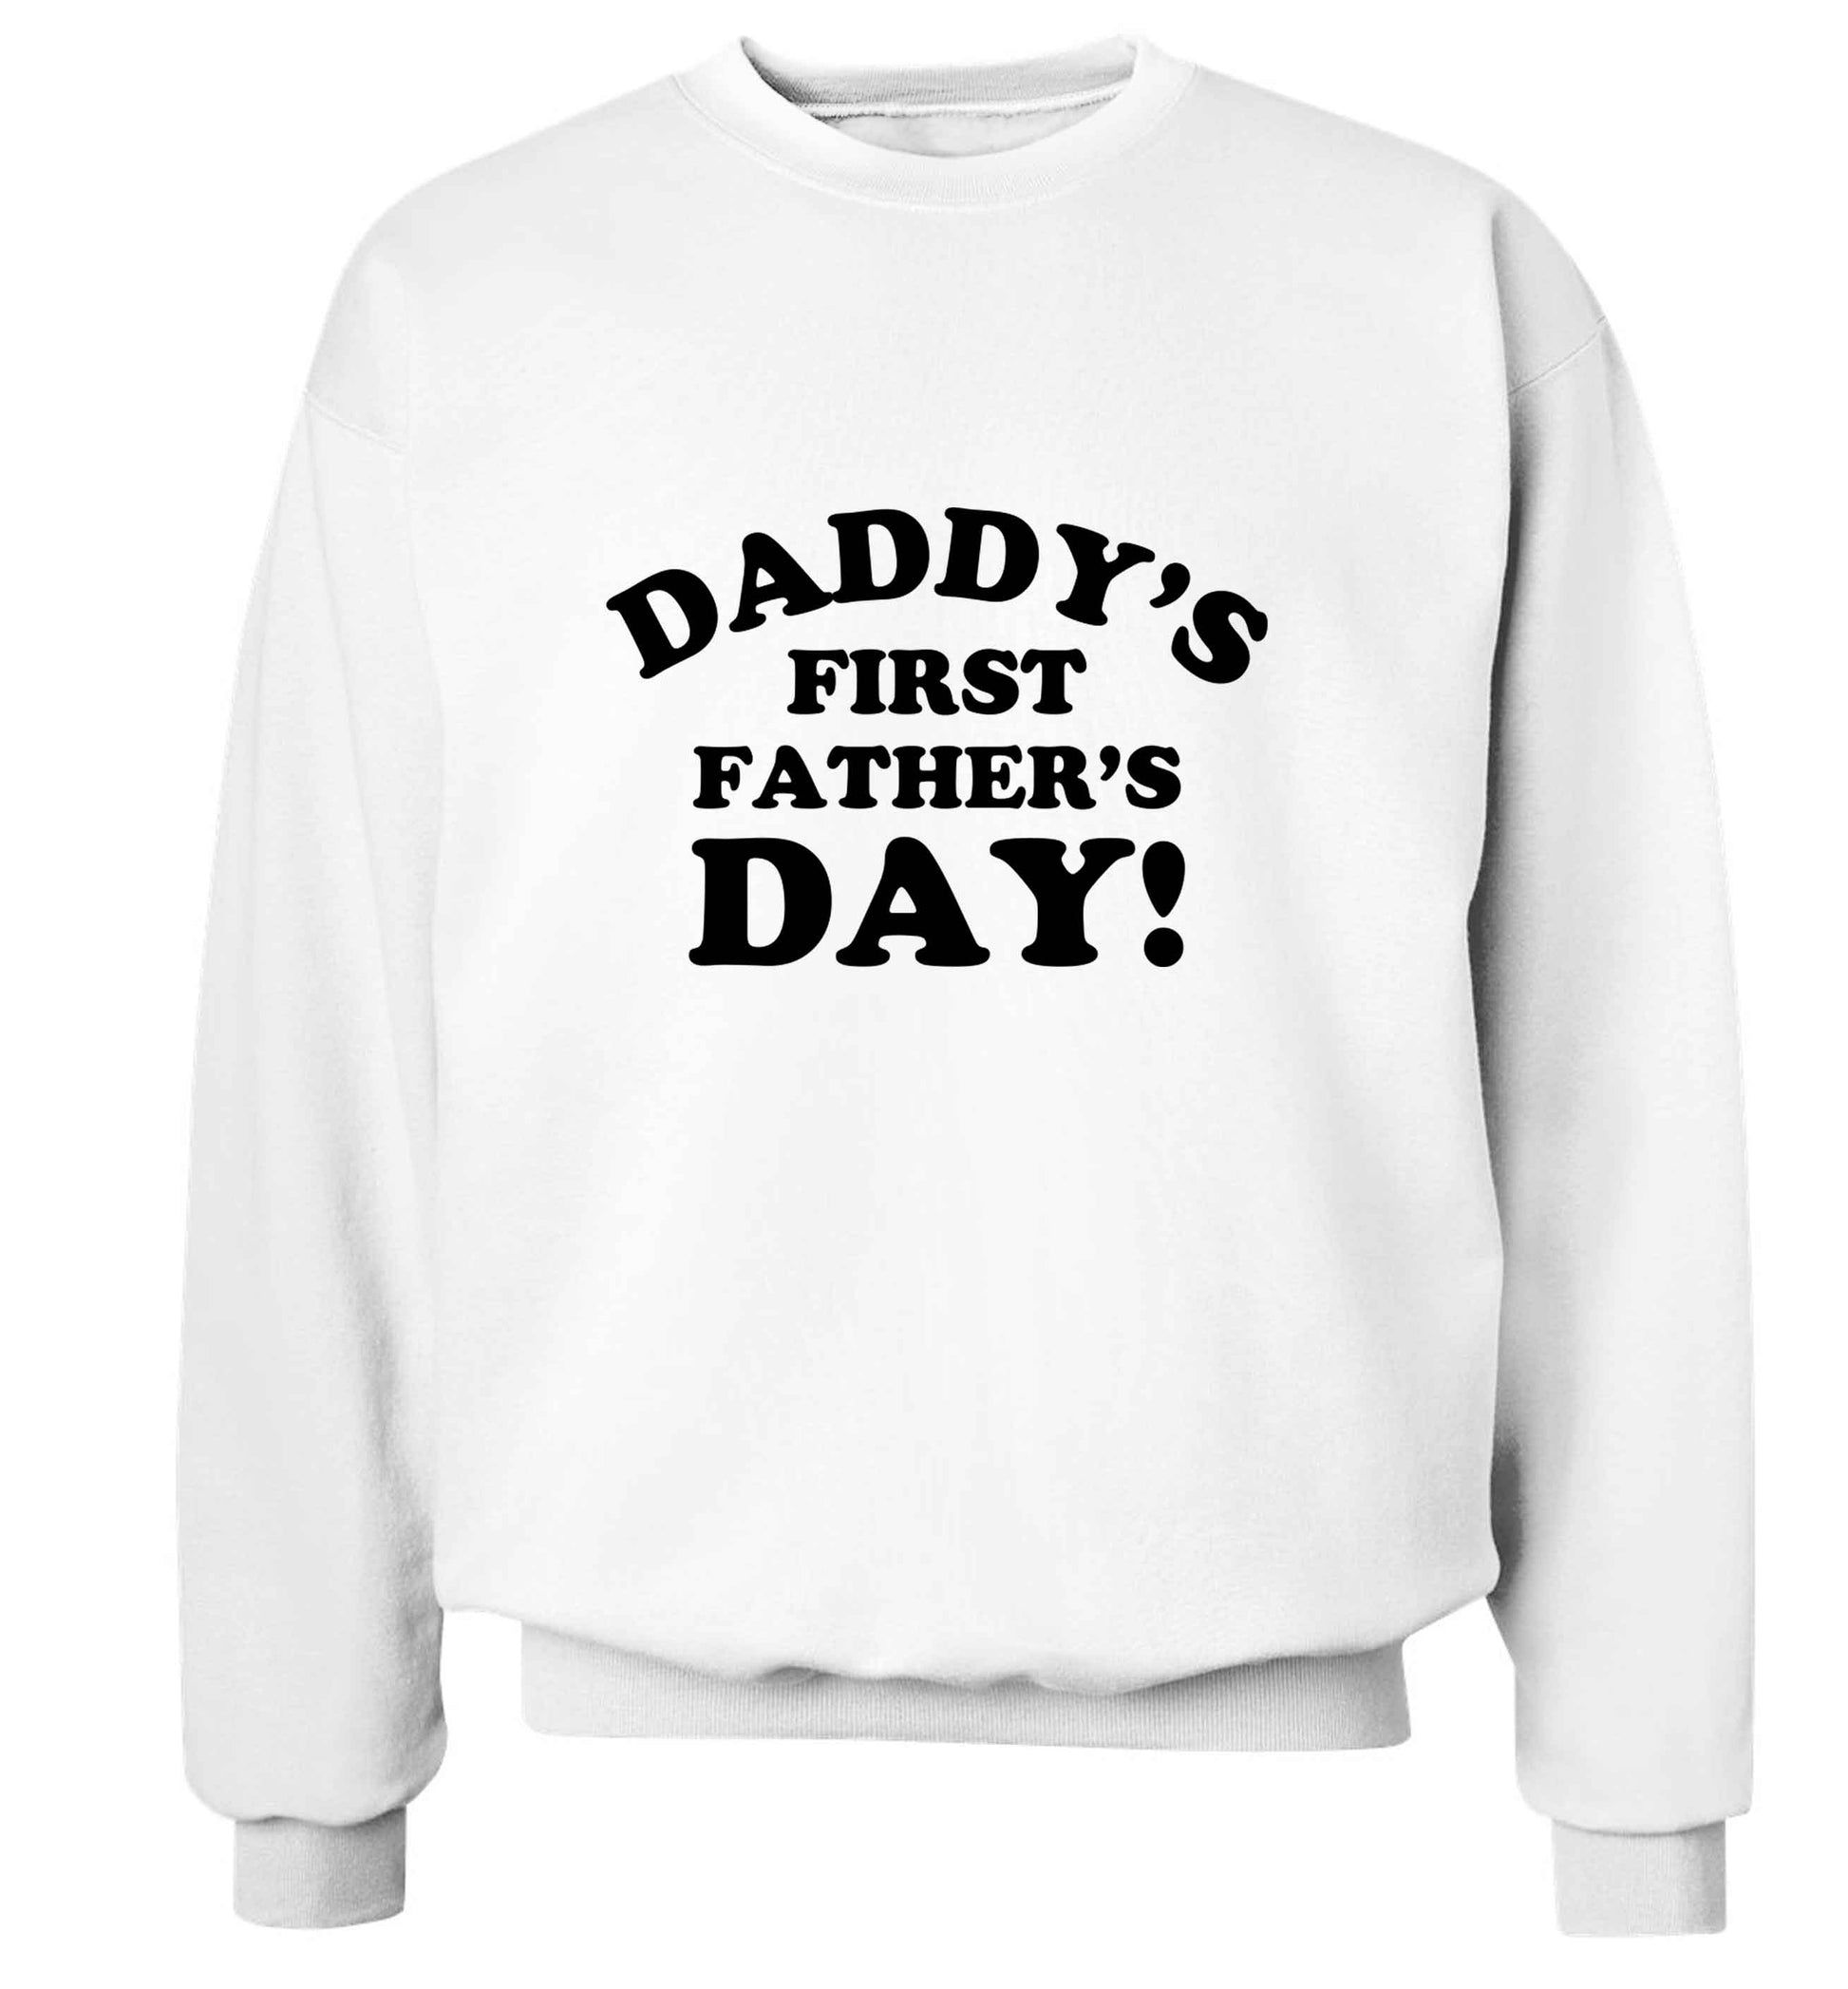 Daddy's first father's day adult's unisex white sweater 2XL